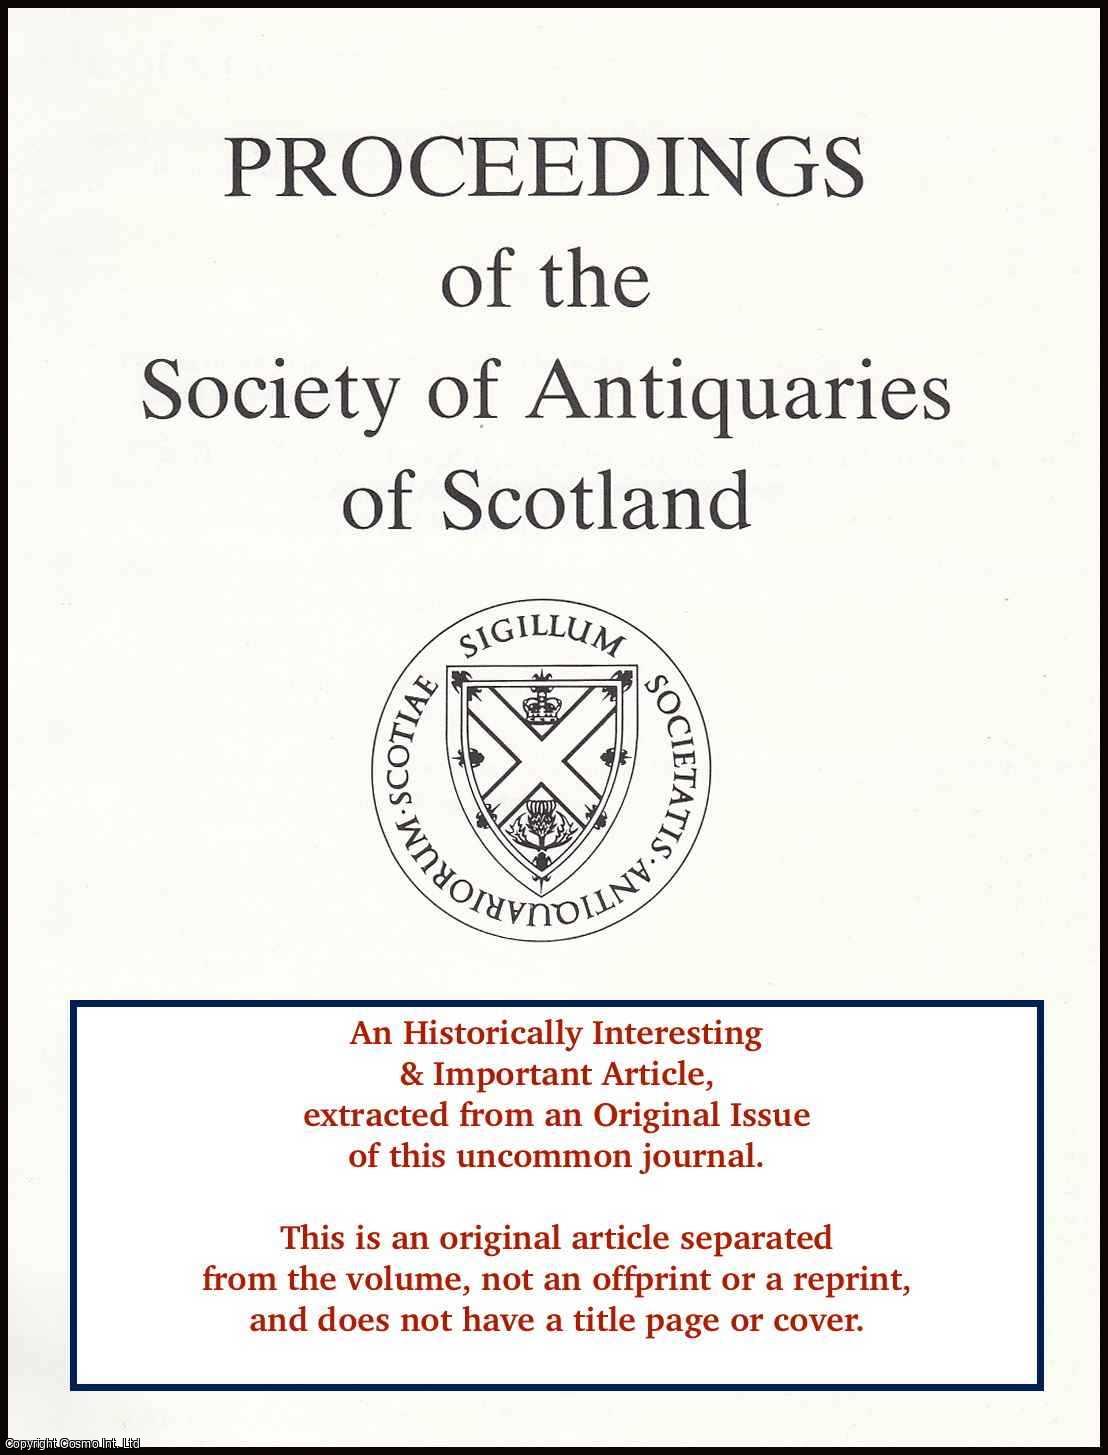 Robin H. Rodger - The Silver Ball of Rattray: A Unique Scottish Sporting Trophy. An original article from the Proceedings of the Society of Antiquaries of Scotland, 1992.